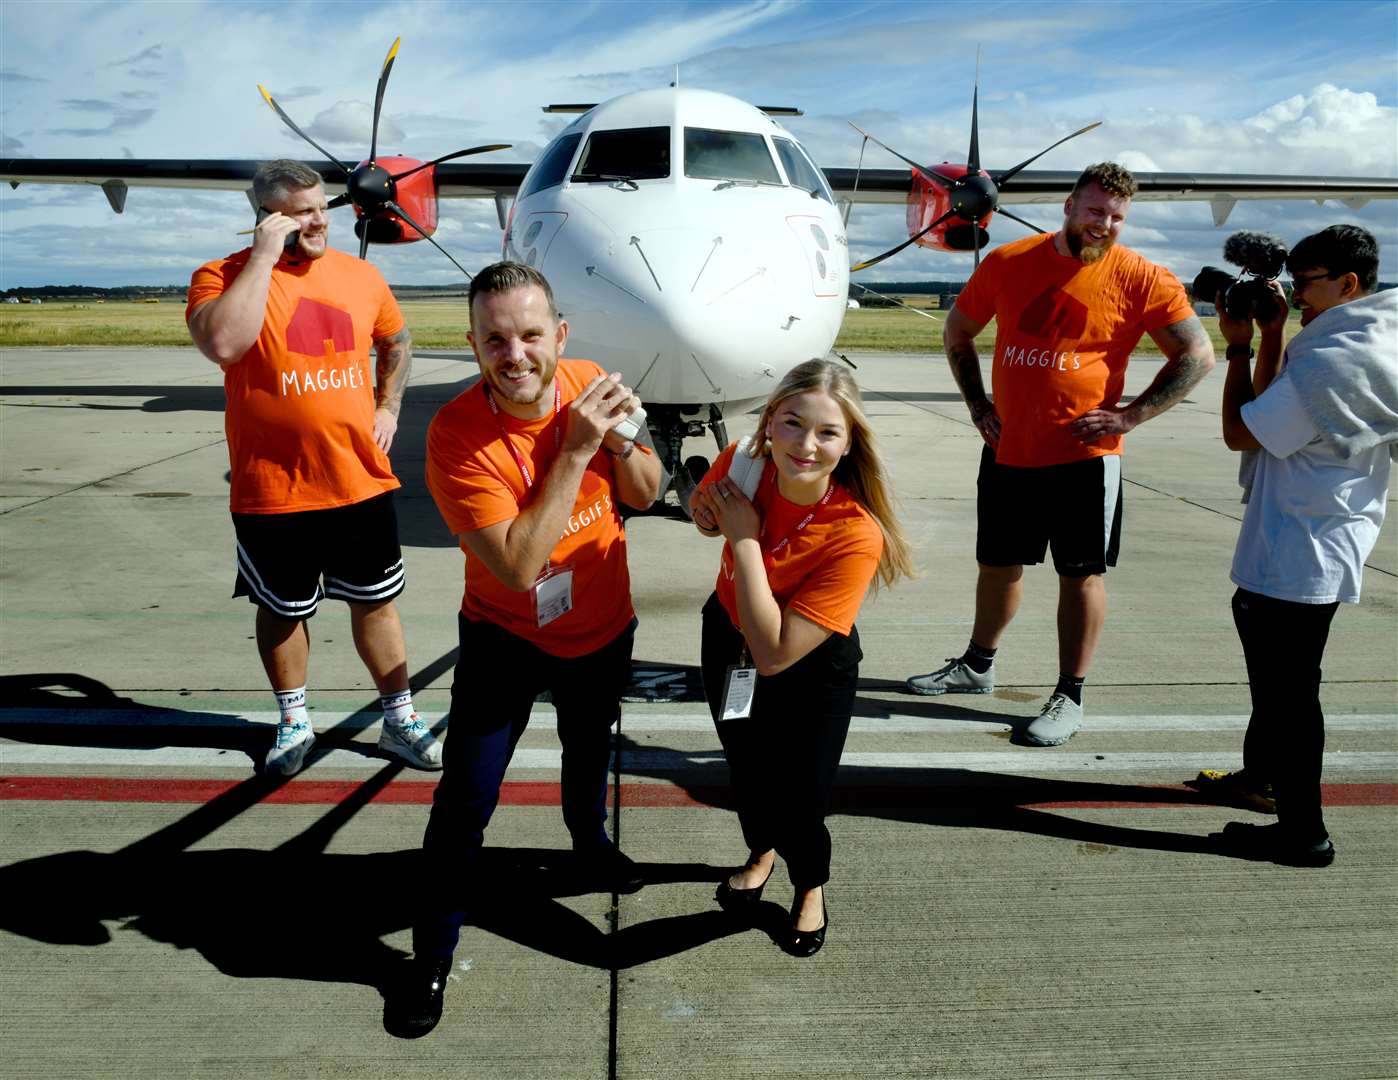 Maggies' Andrew Benjamin and Mia Pimm pulling the plane while Luke Stoltman and Tom Stoltman take a break.  Pictured: James Mackenzie.